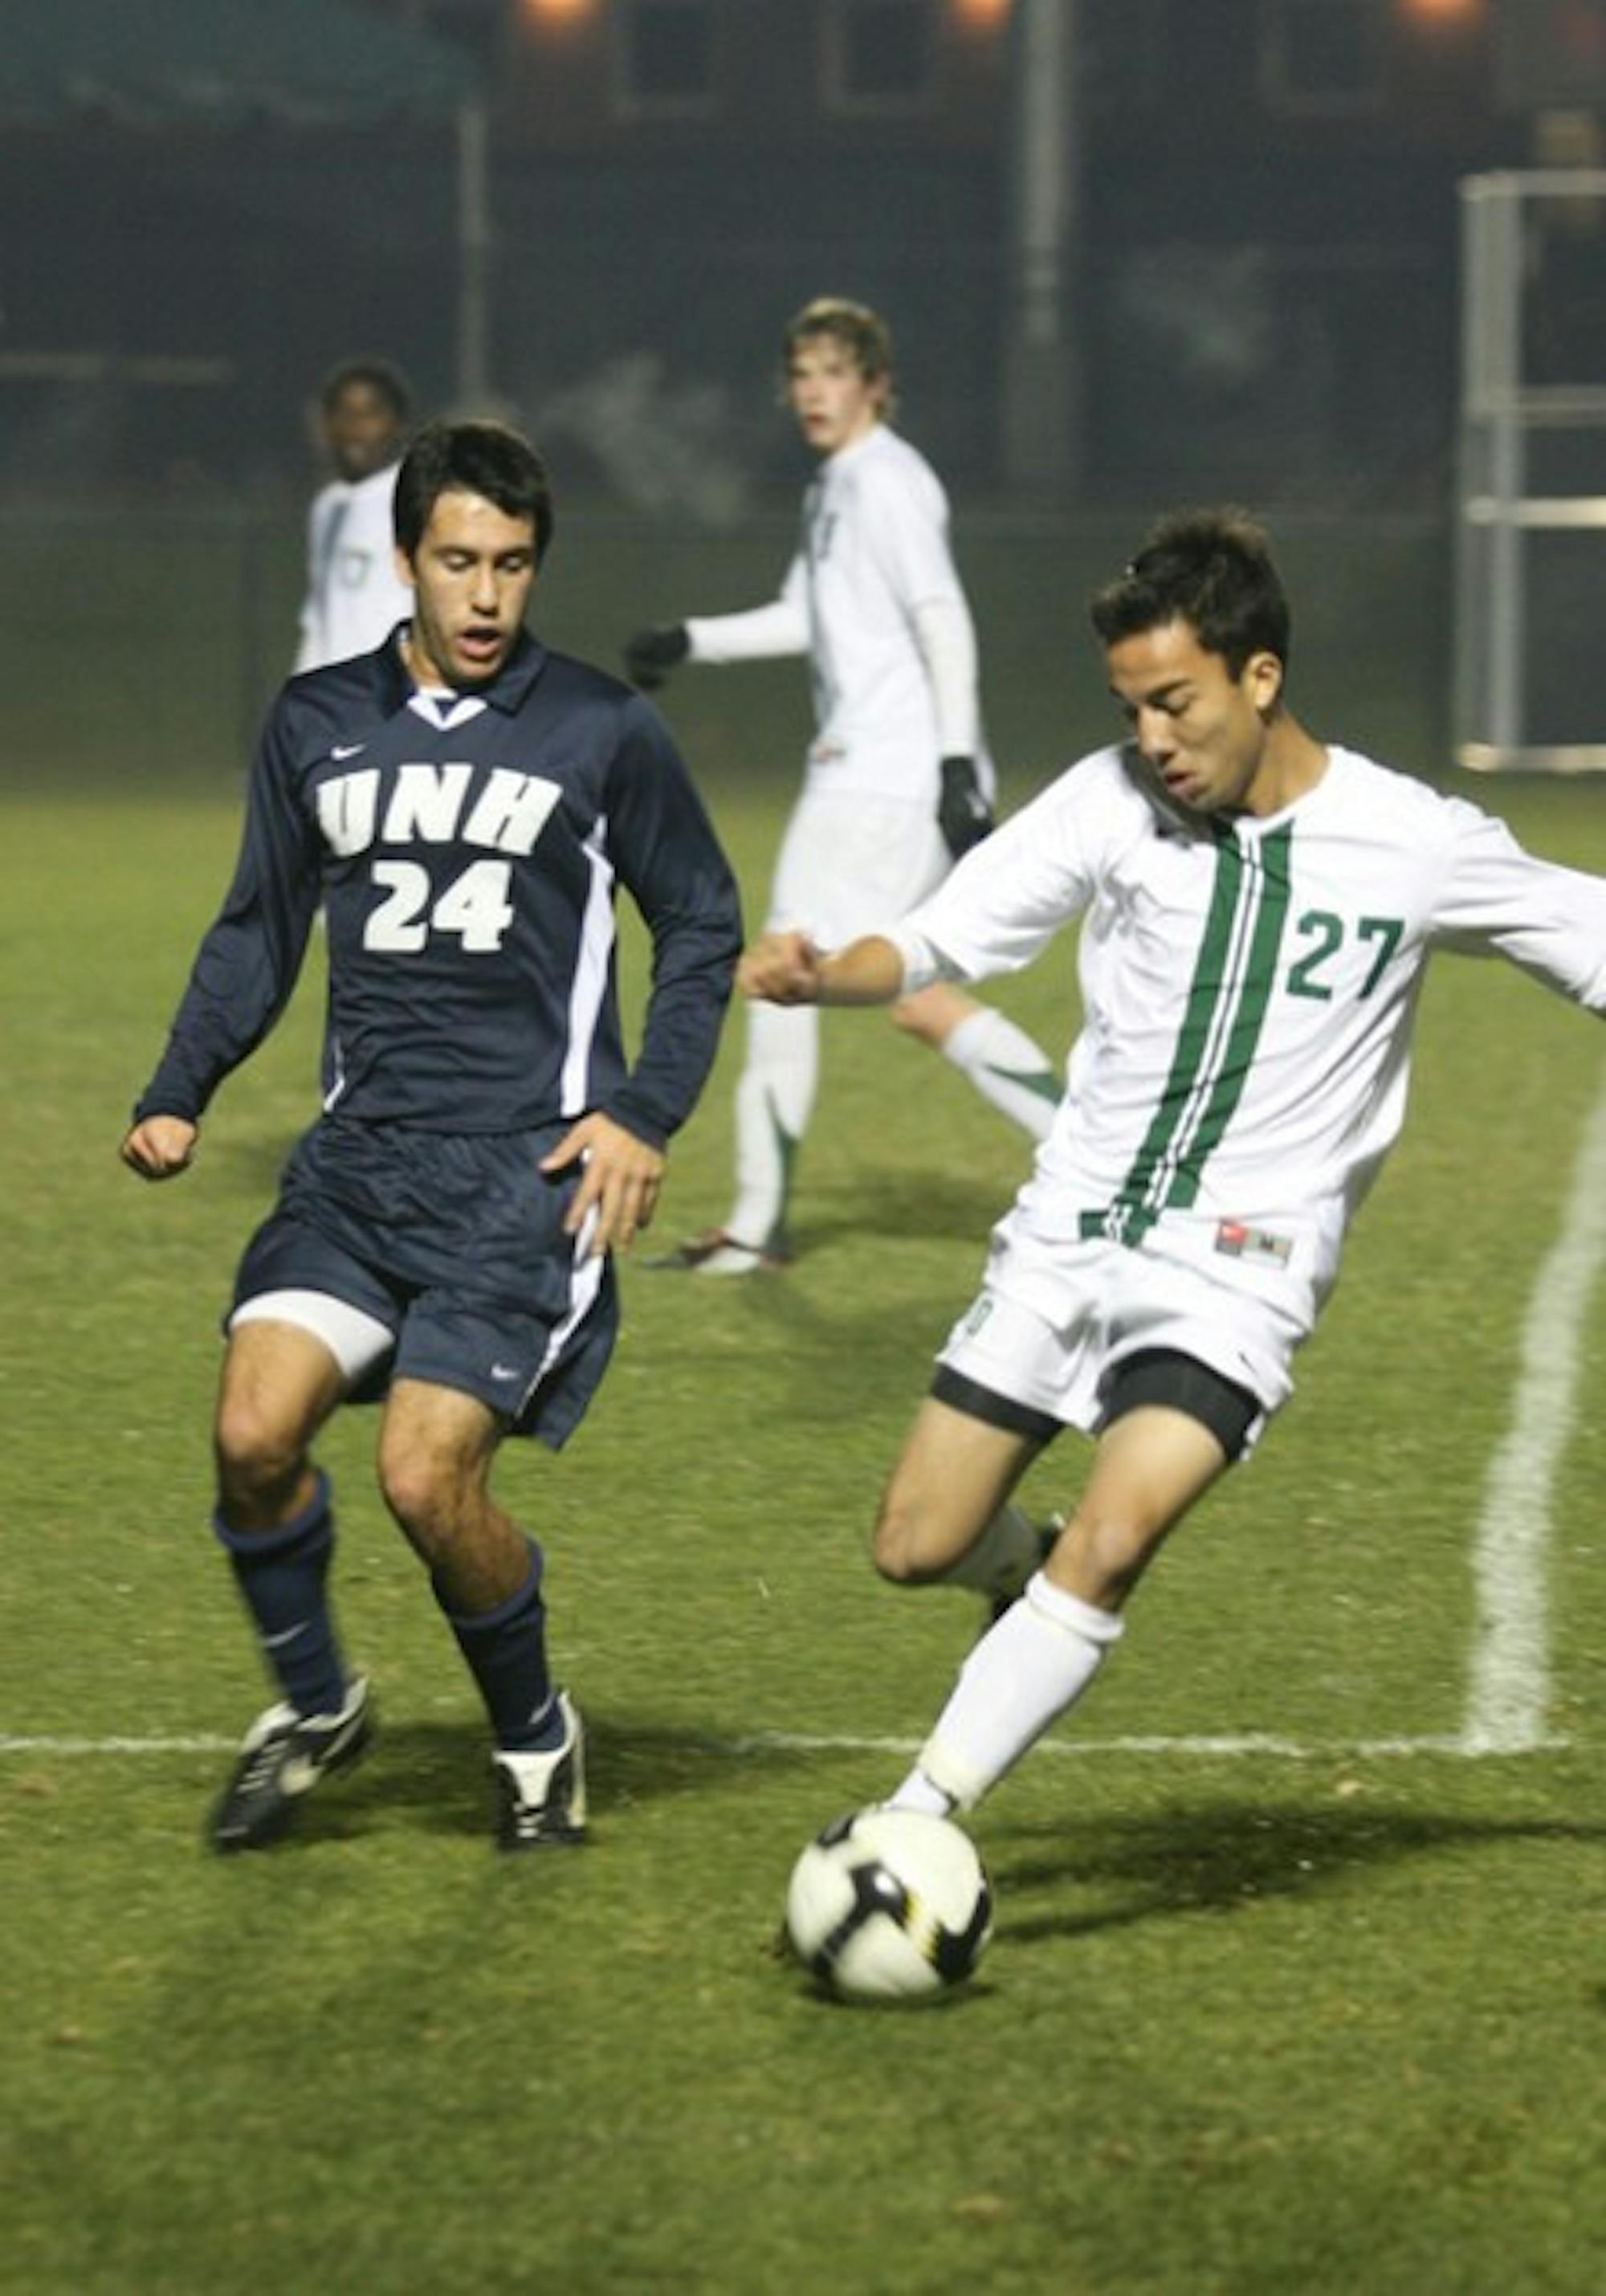 Andrew Olsen '11 notched the game-winning goal eight minutes into overtime as the Big Green outlasted UNH, 2-1.